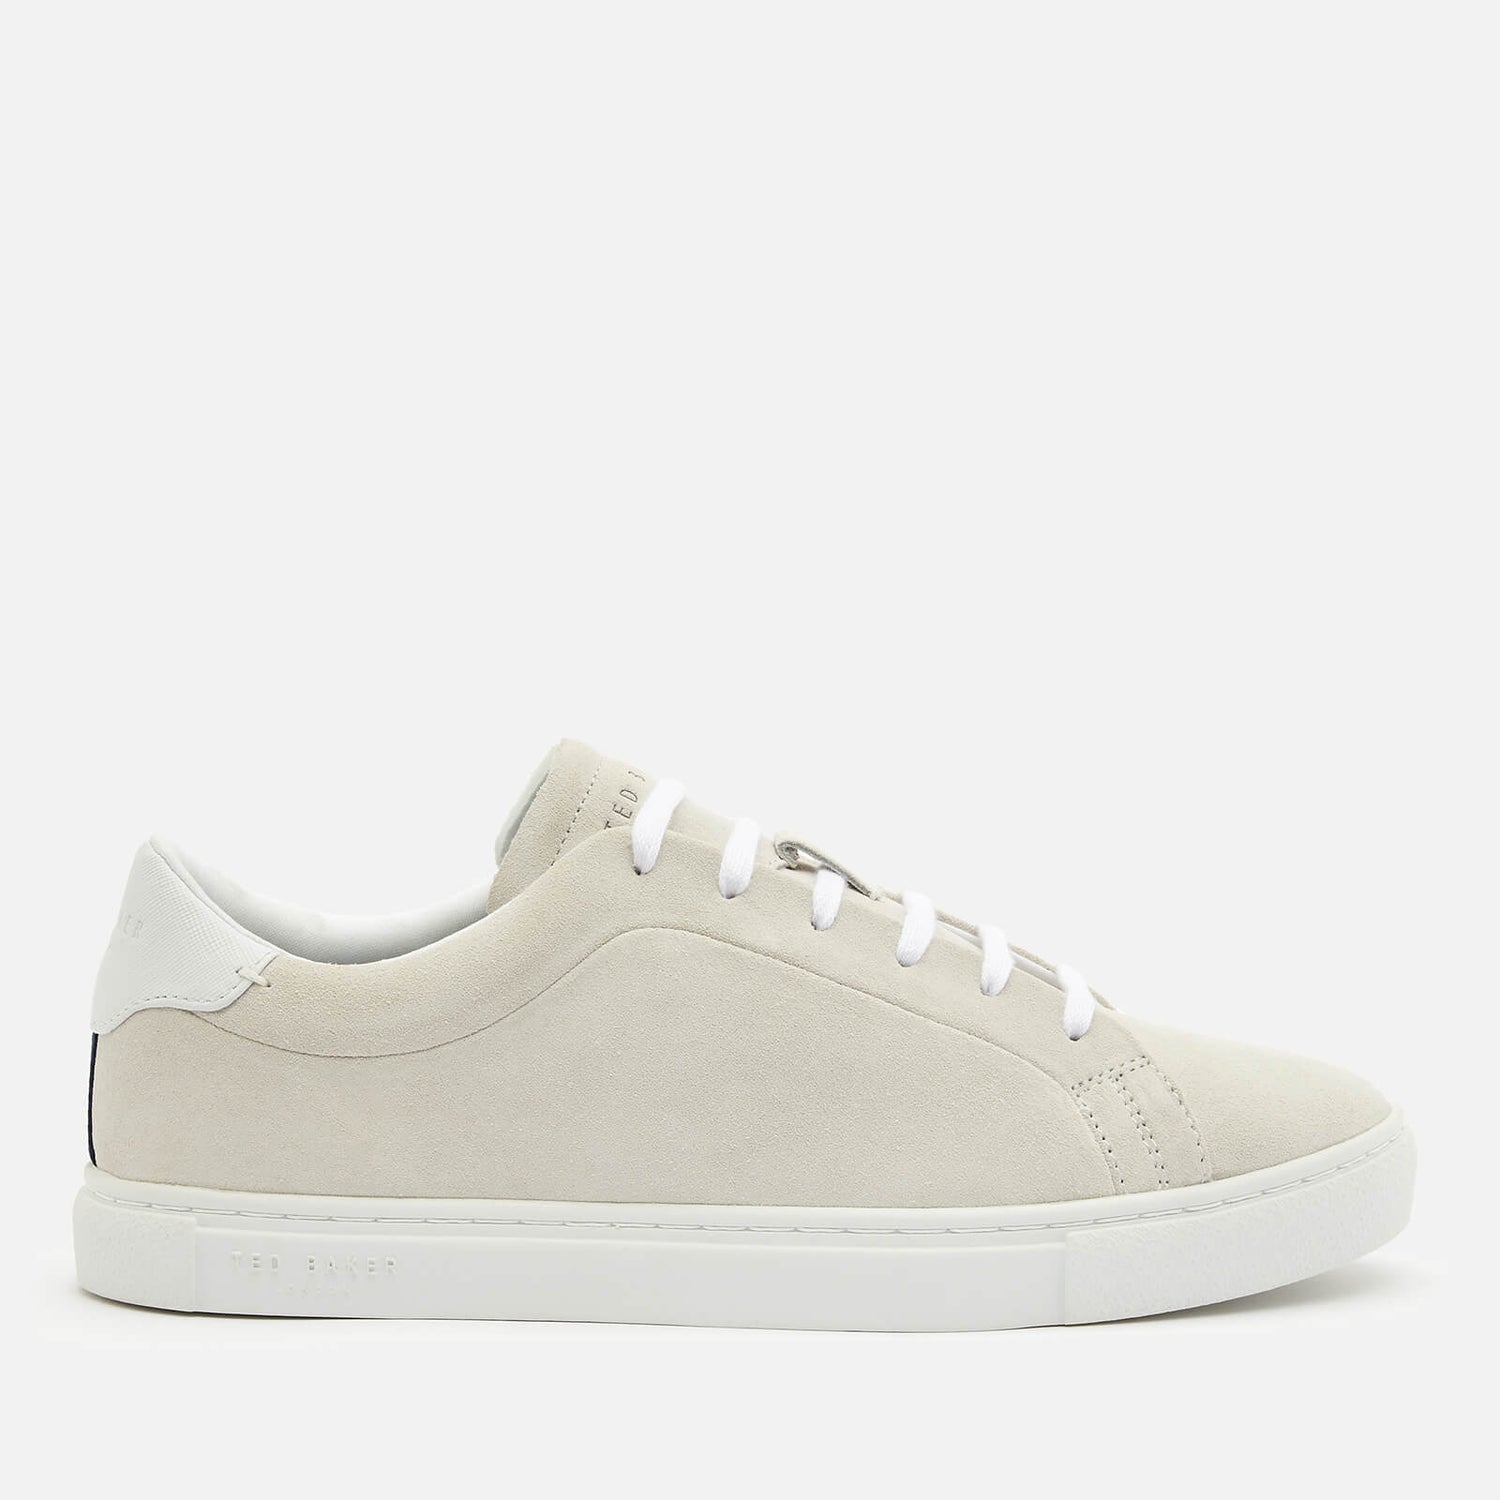 Ted Baker Men's Triloba Suede Cupsole Trainers - White - UK 7